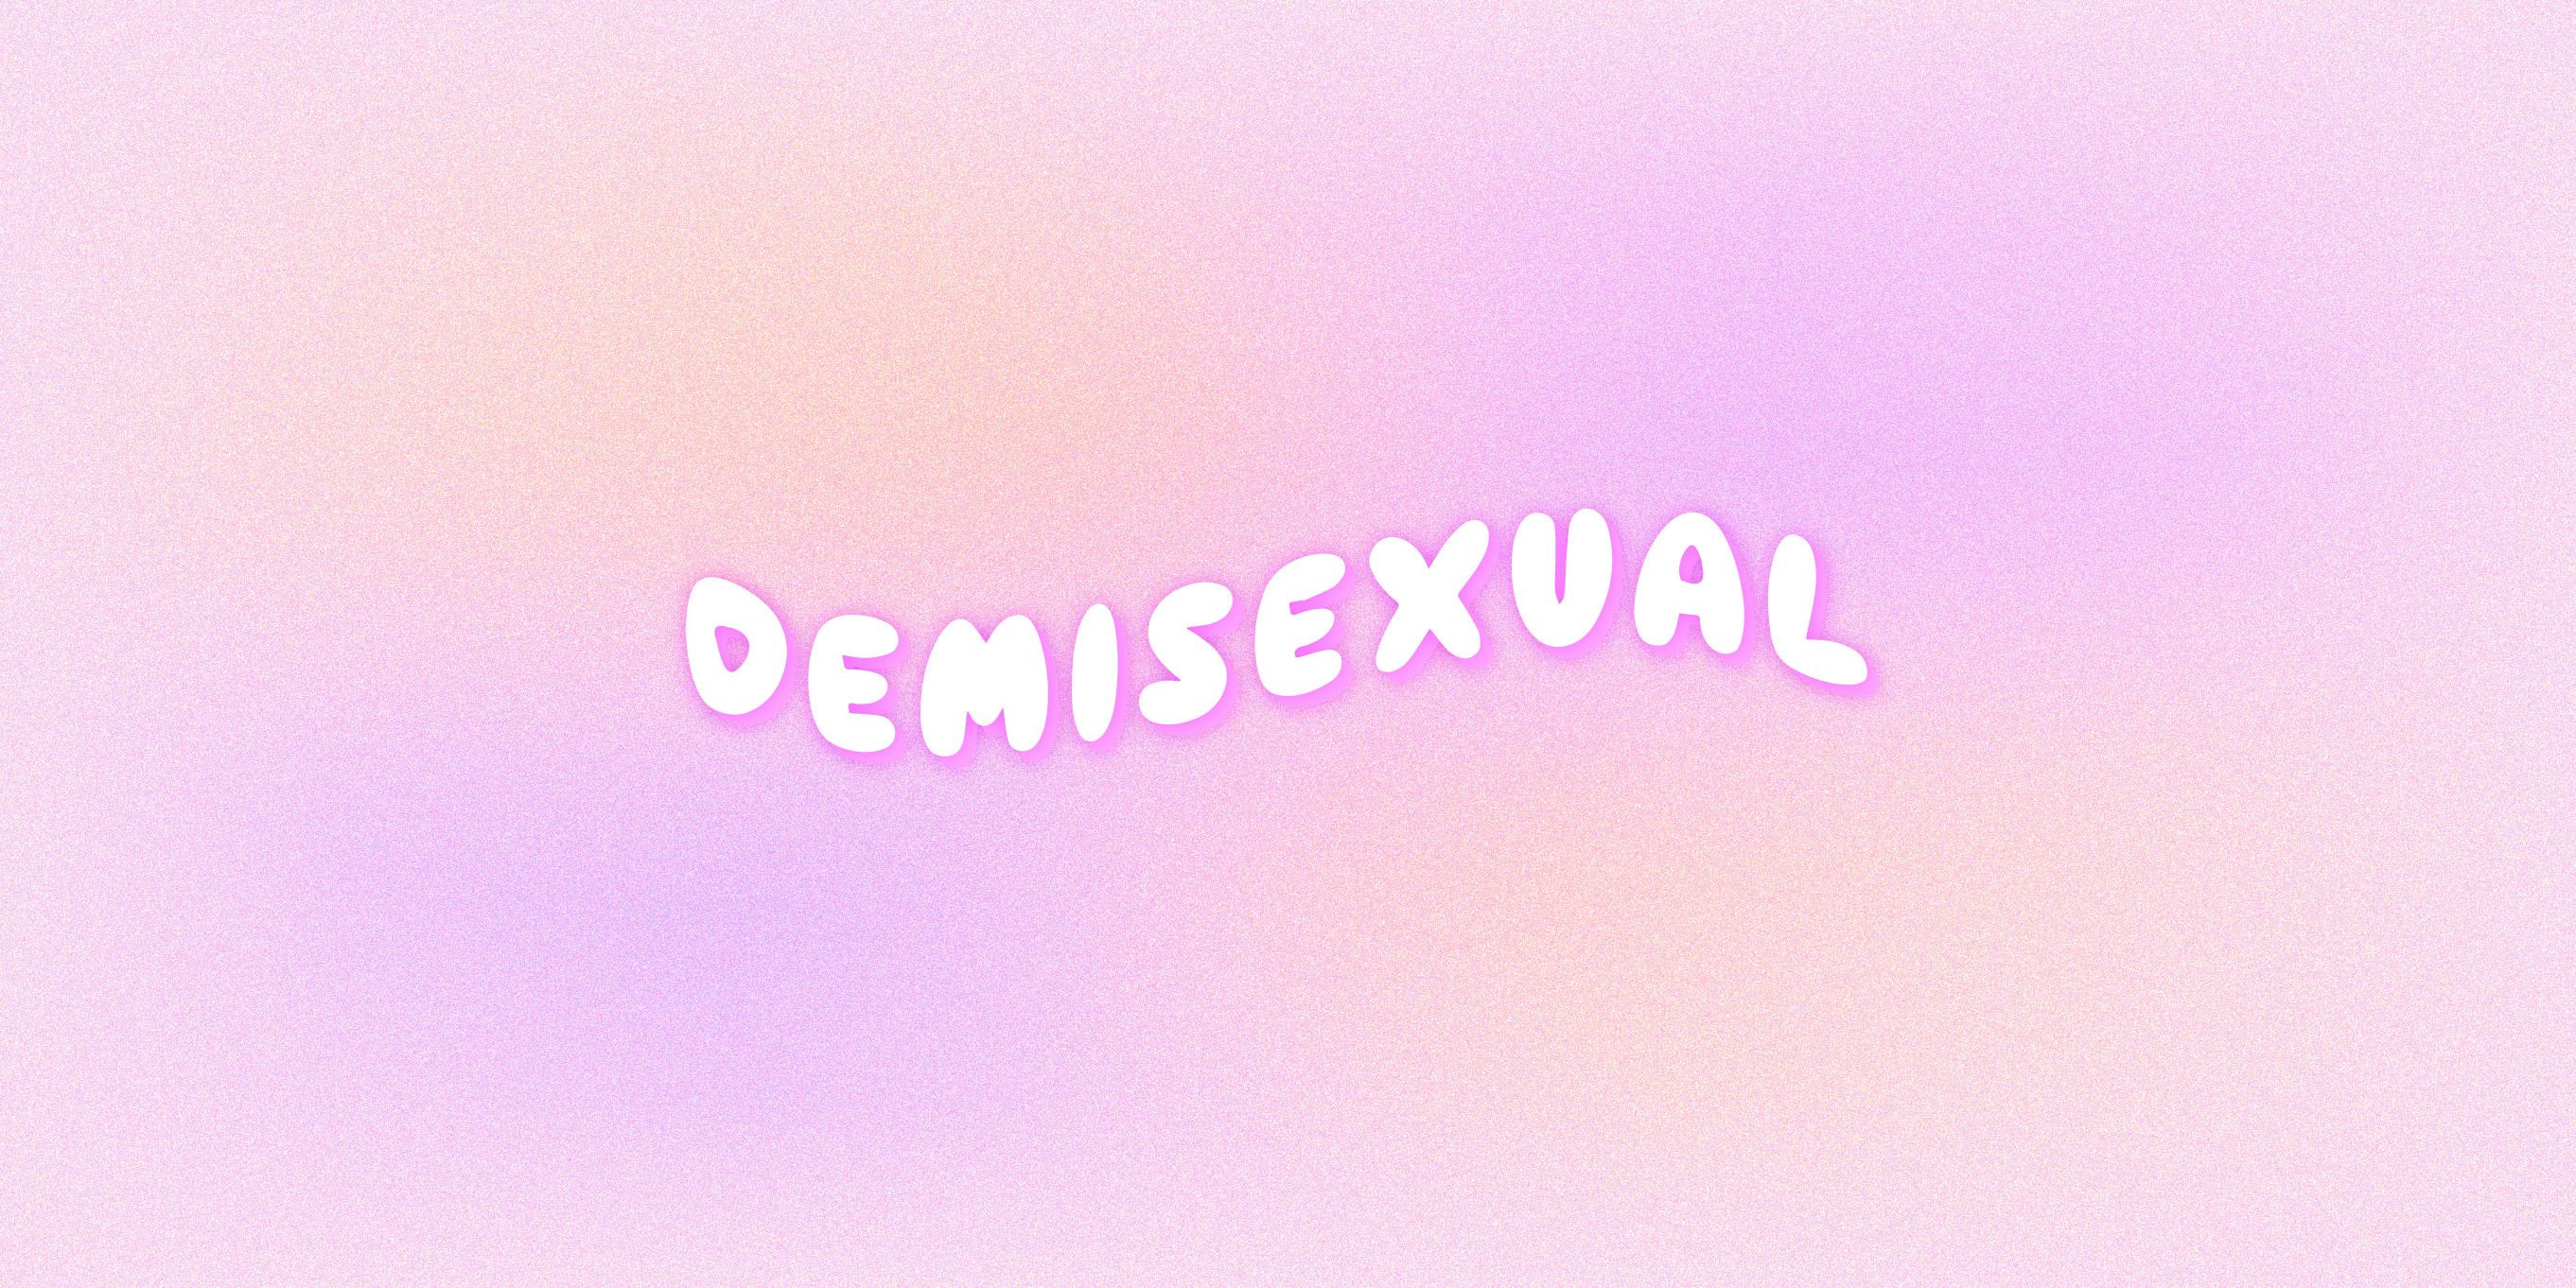 Made 2 wallpapers for us demisexuals  an enby trixic neptunic lesbian  demisexual  rdemisexuality